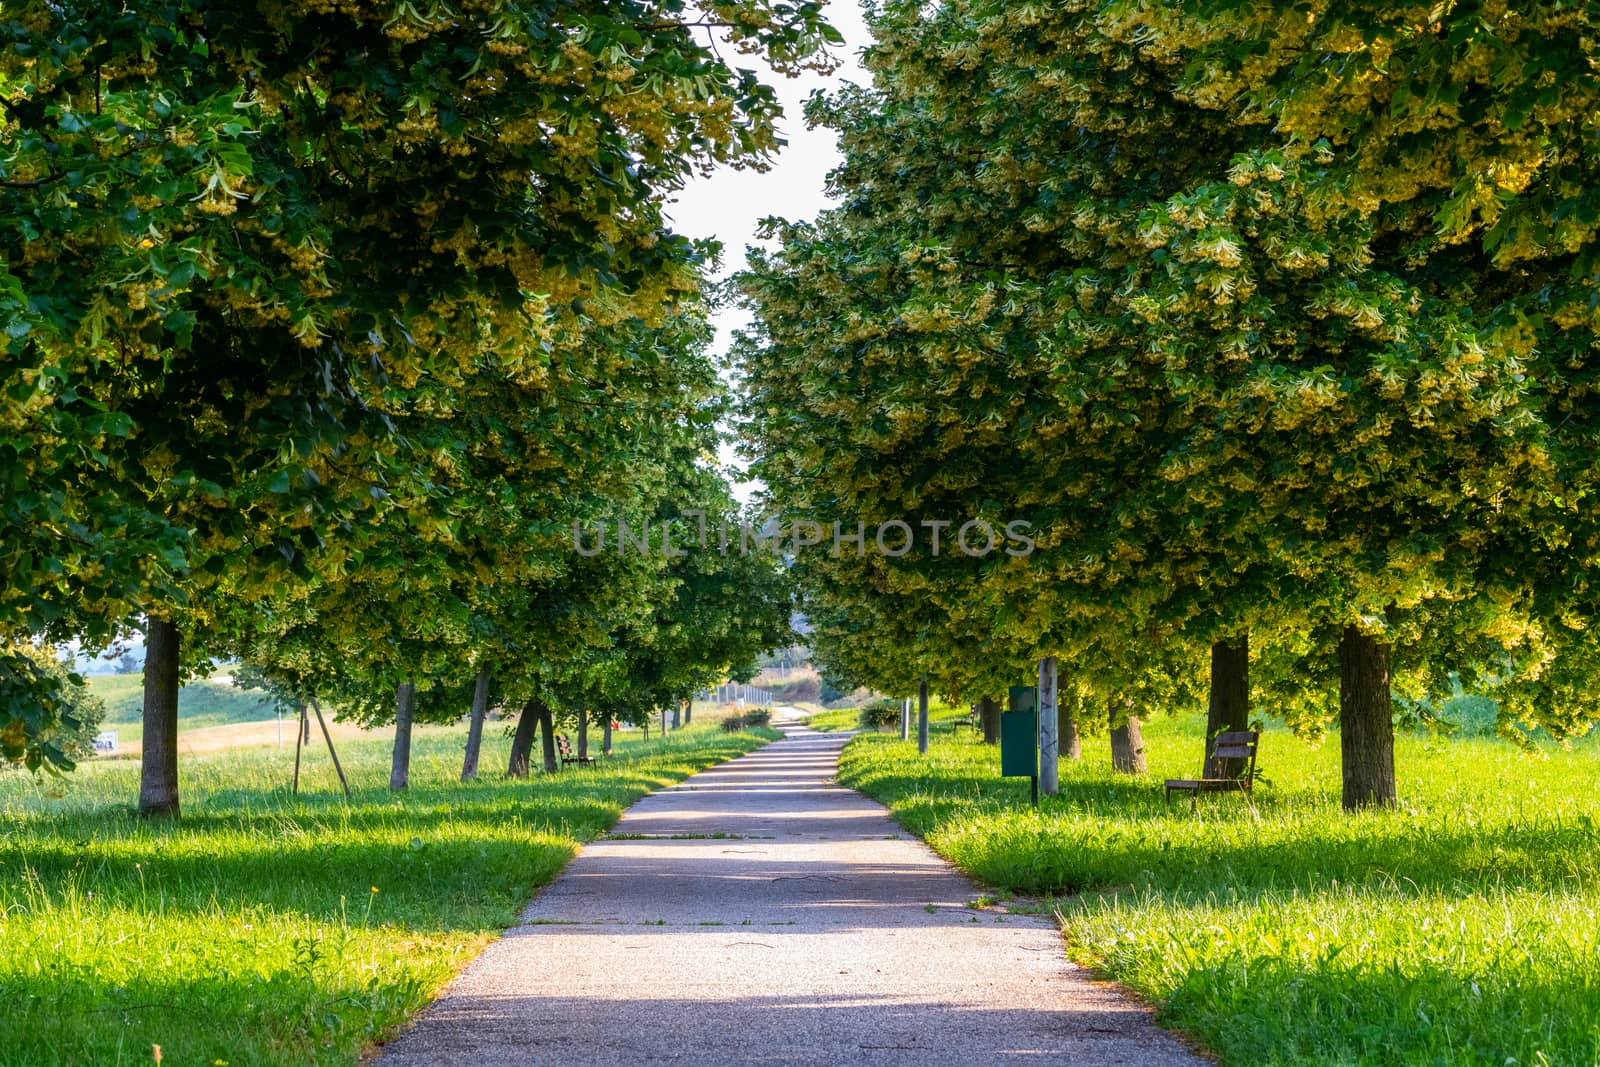 Spring, summer landscape, linden alley in the sun, footpath in nature park. Branches of trees hanging over the path, Slovenska Bistrica, Slovenia